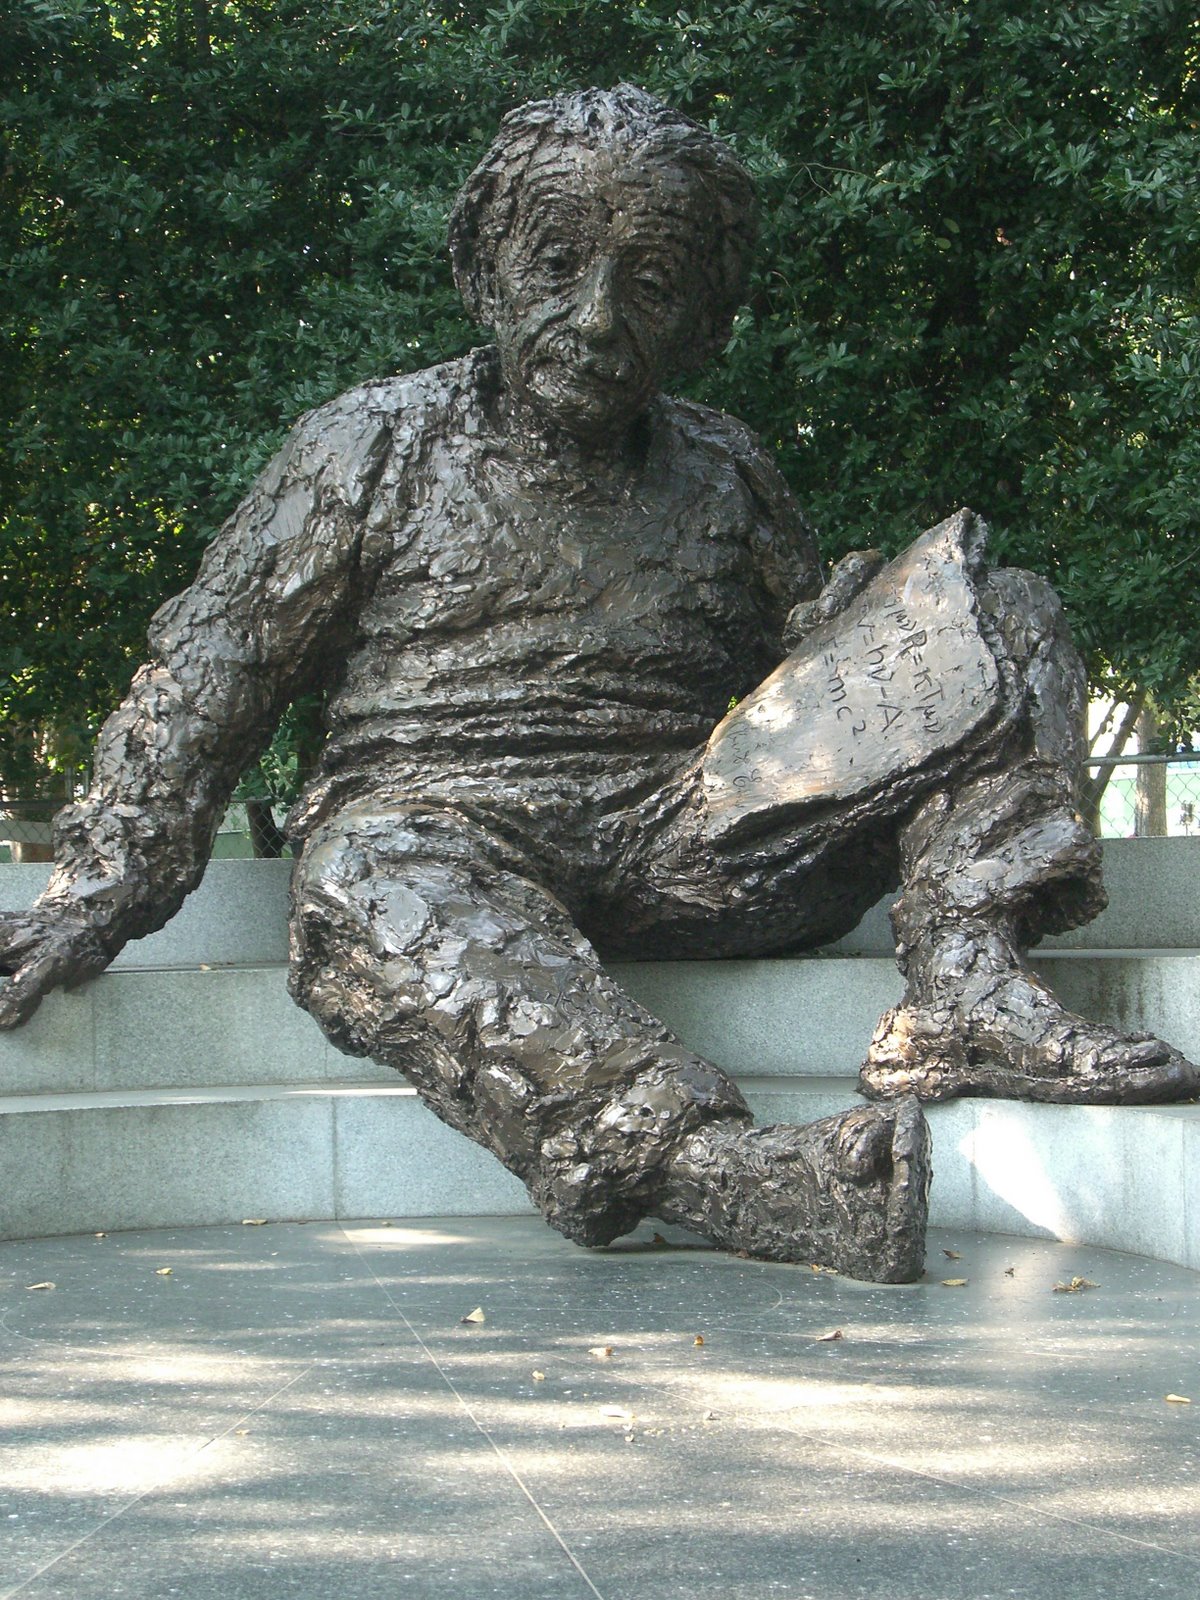 Did you know that we have an Einstein Memorial in Washington, DC?